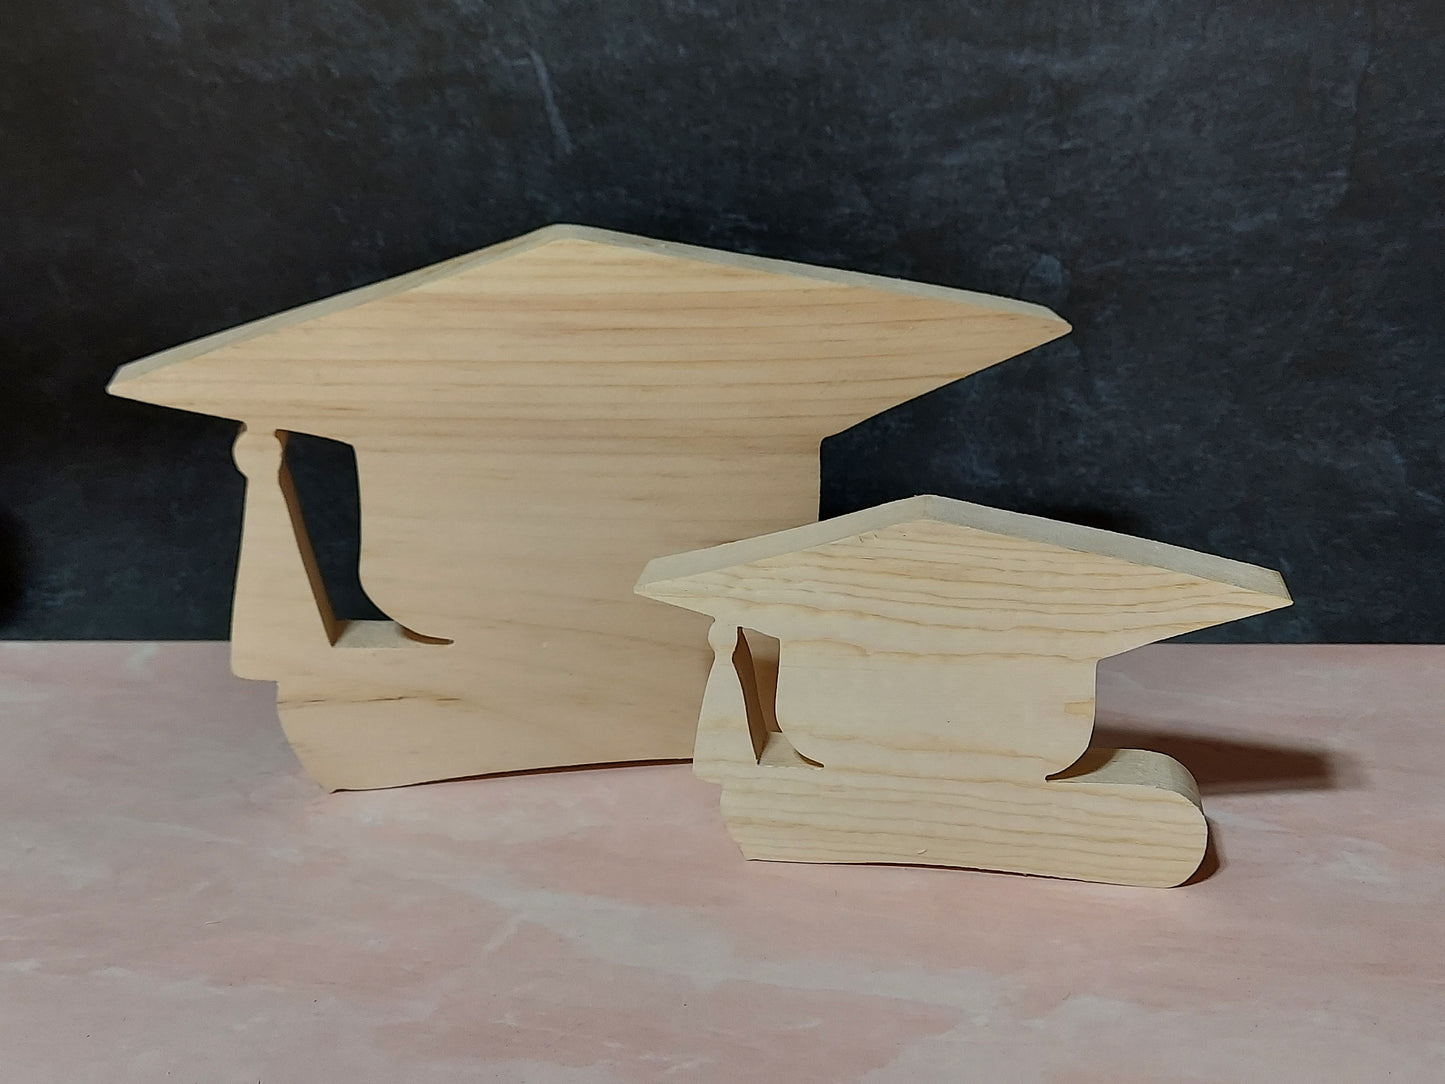 Unfinished Wooden Cap  with Diploma Cutout